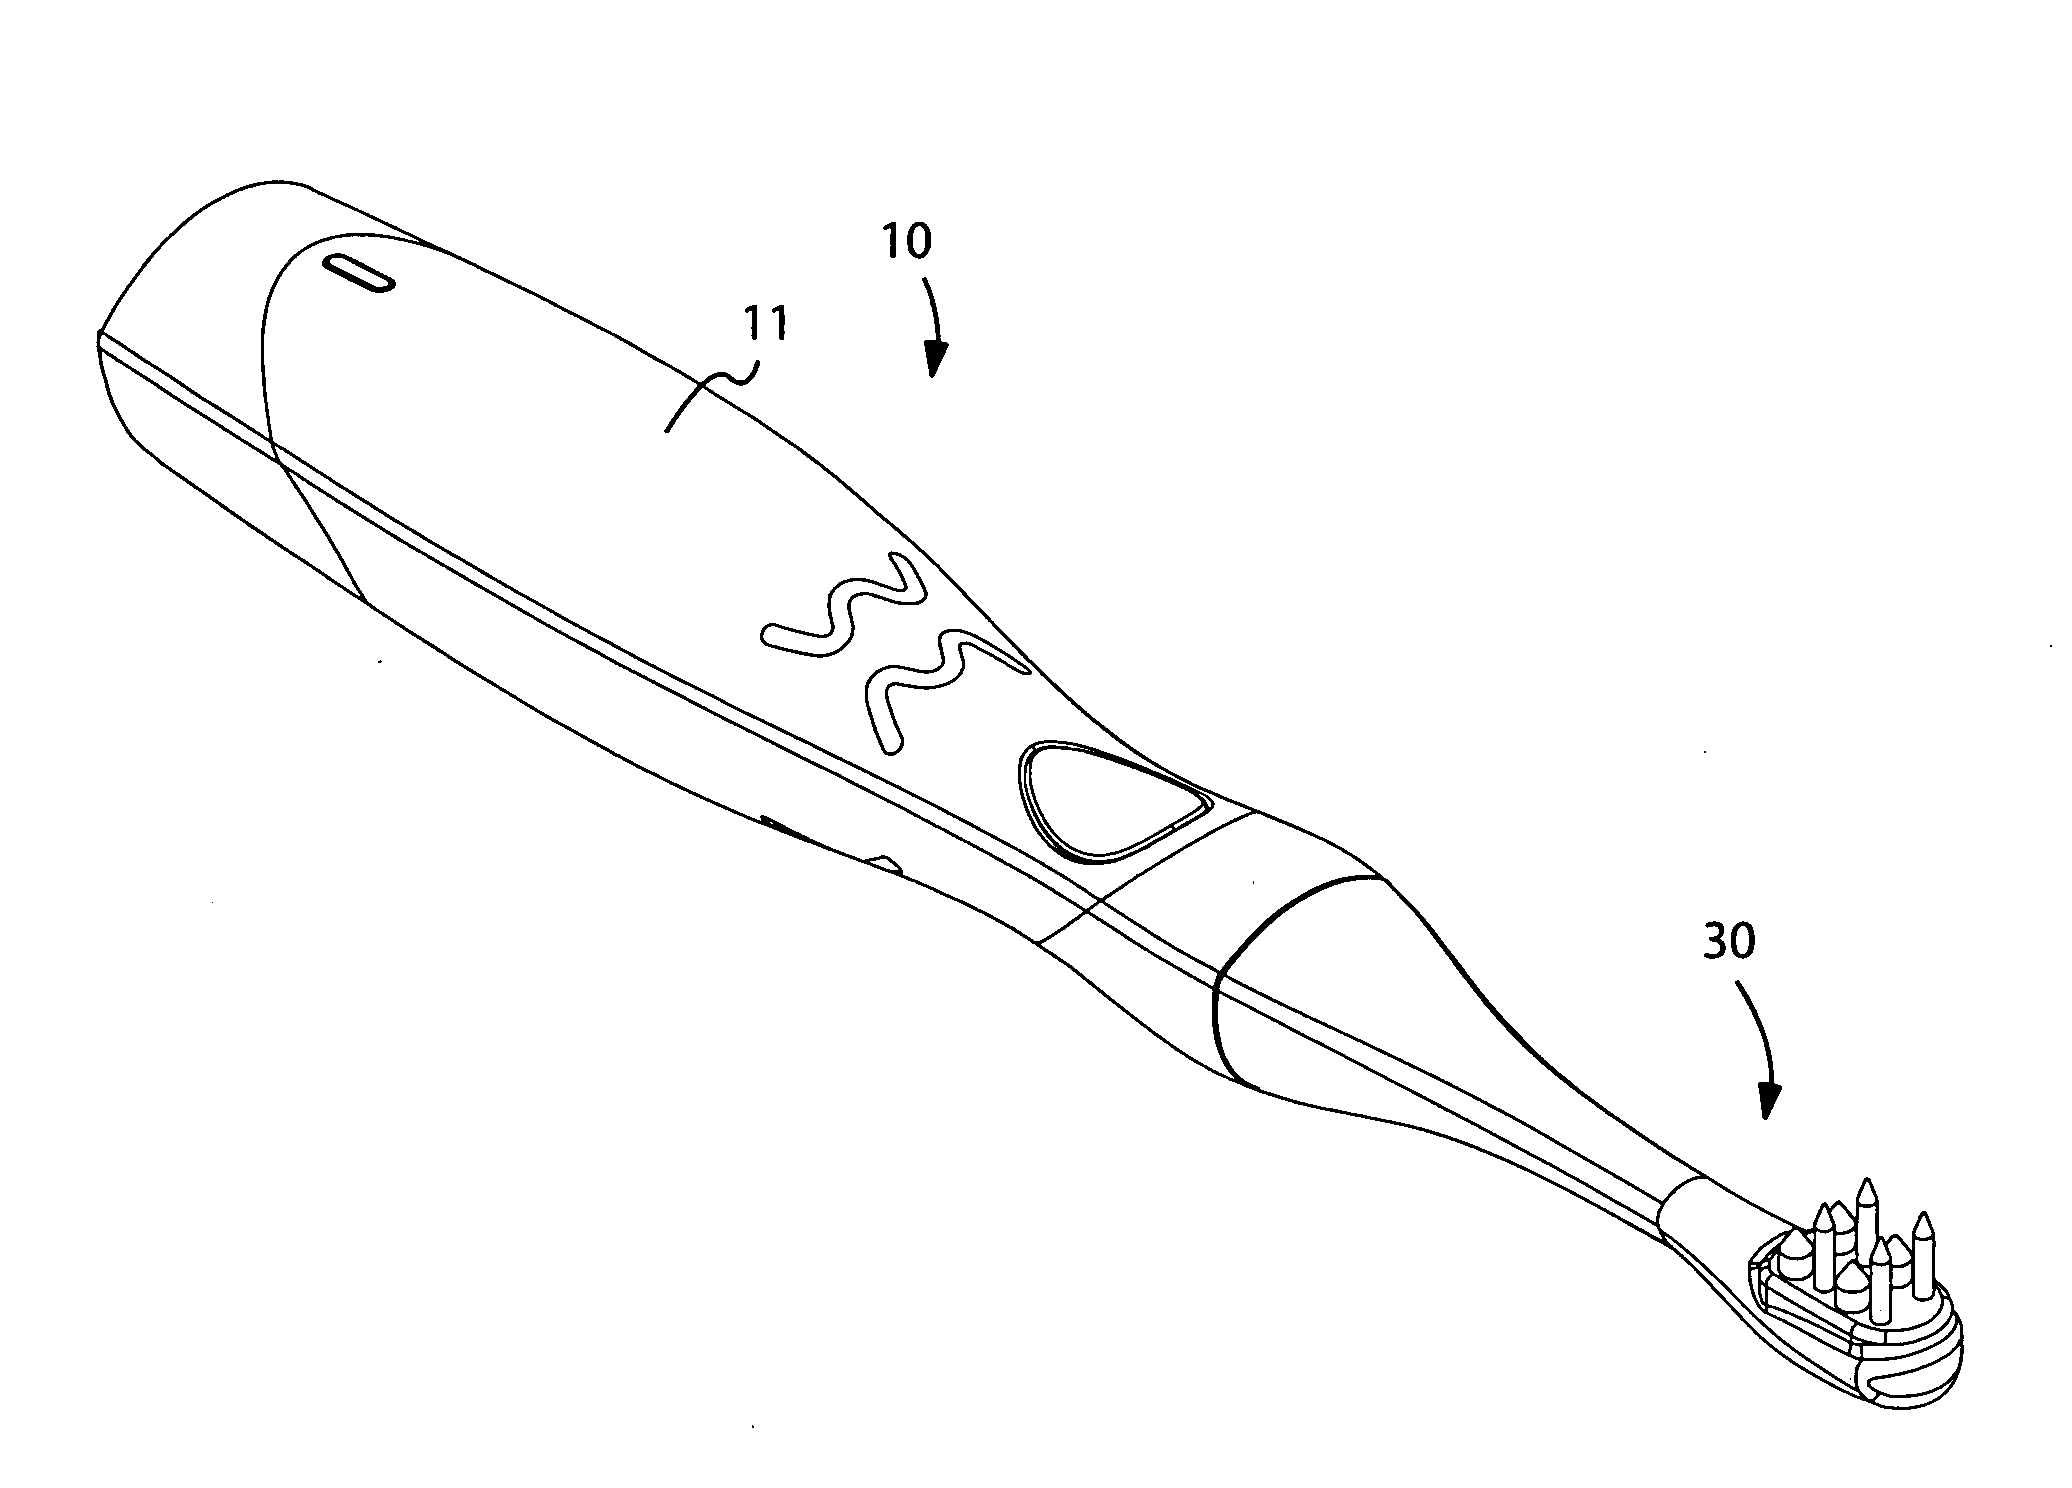 Interchangeable tooth brush and associated method for promoting oral health